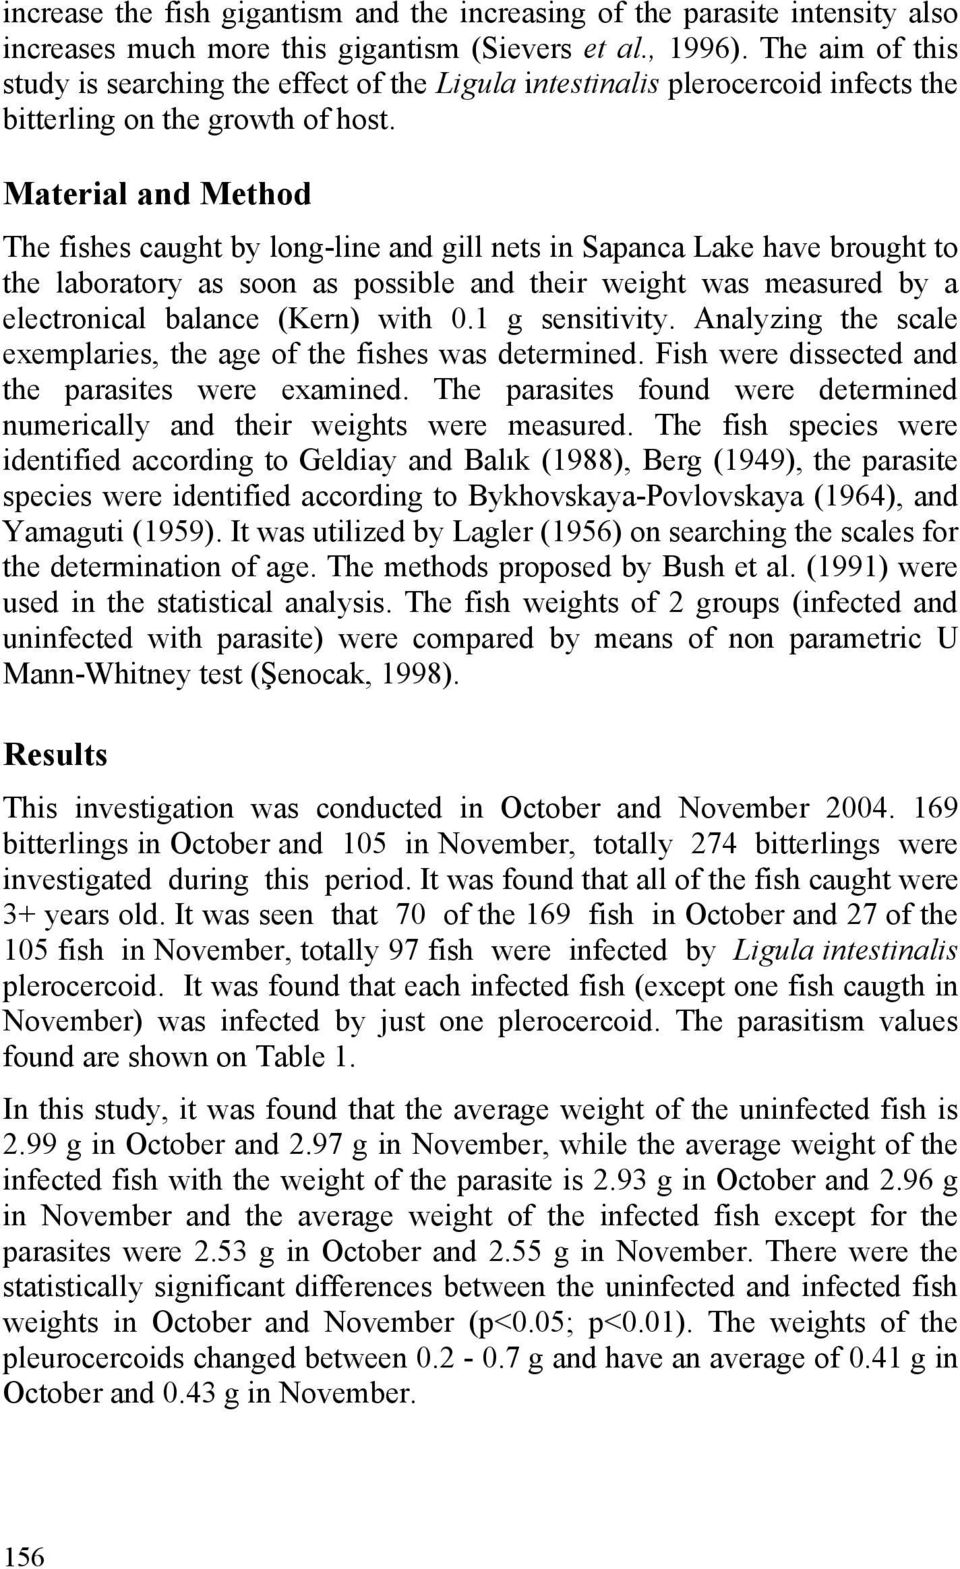 Material and Method The fishes caught by long-line and gill nets in Sapanca Lake have brought to the laboratory as soon as possible and their weight was measured by a electronical balance (Kern) with